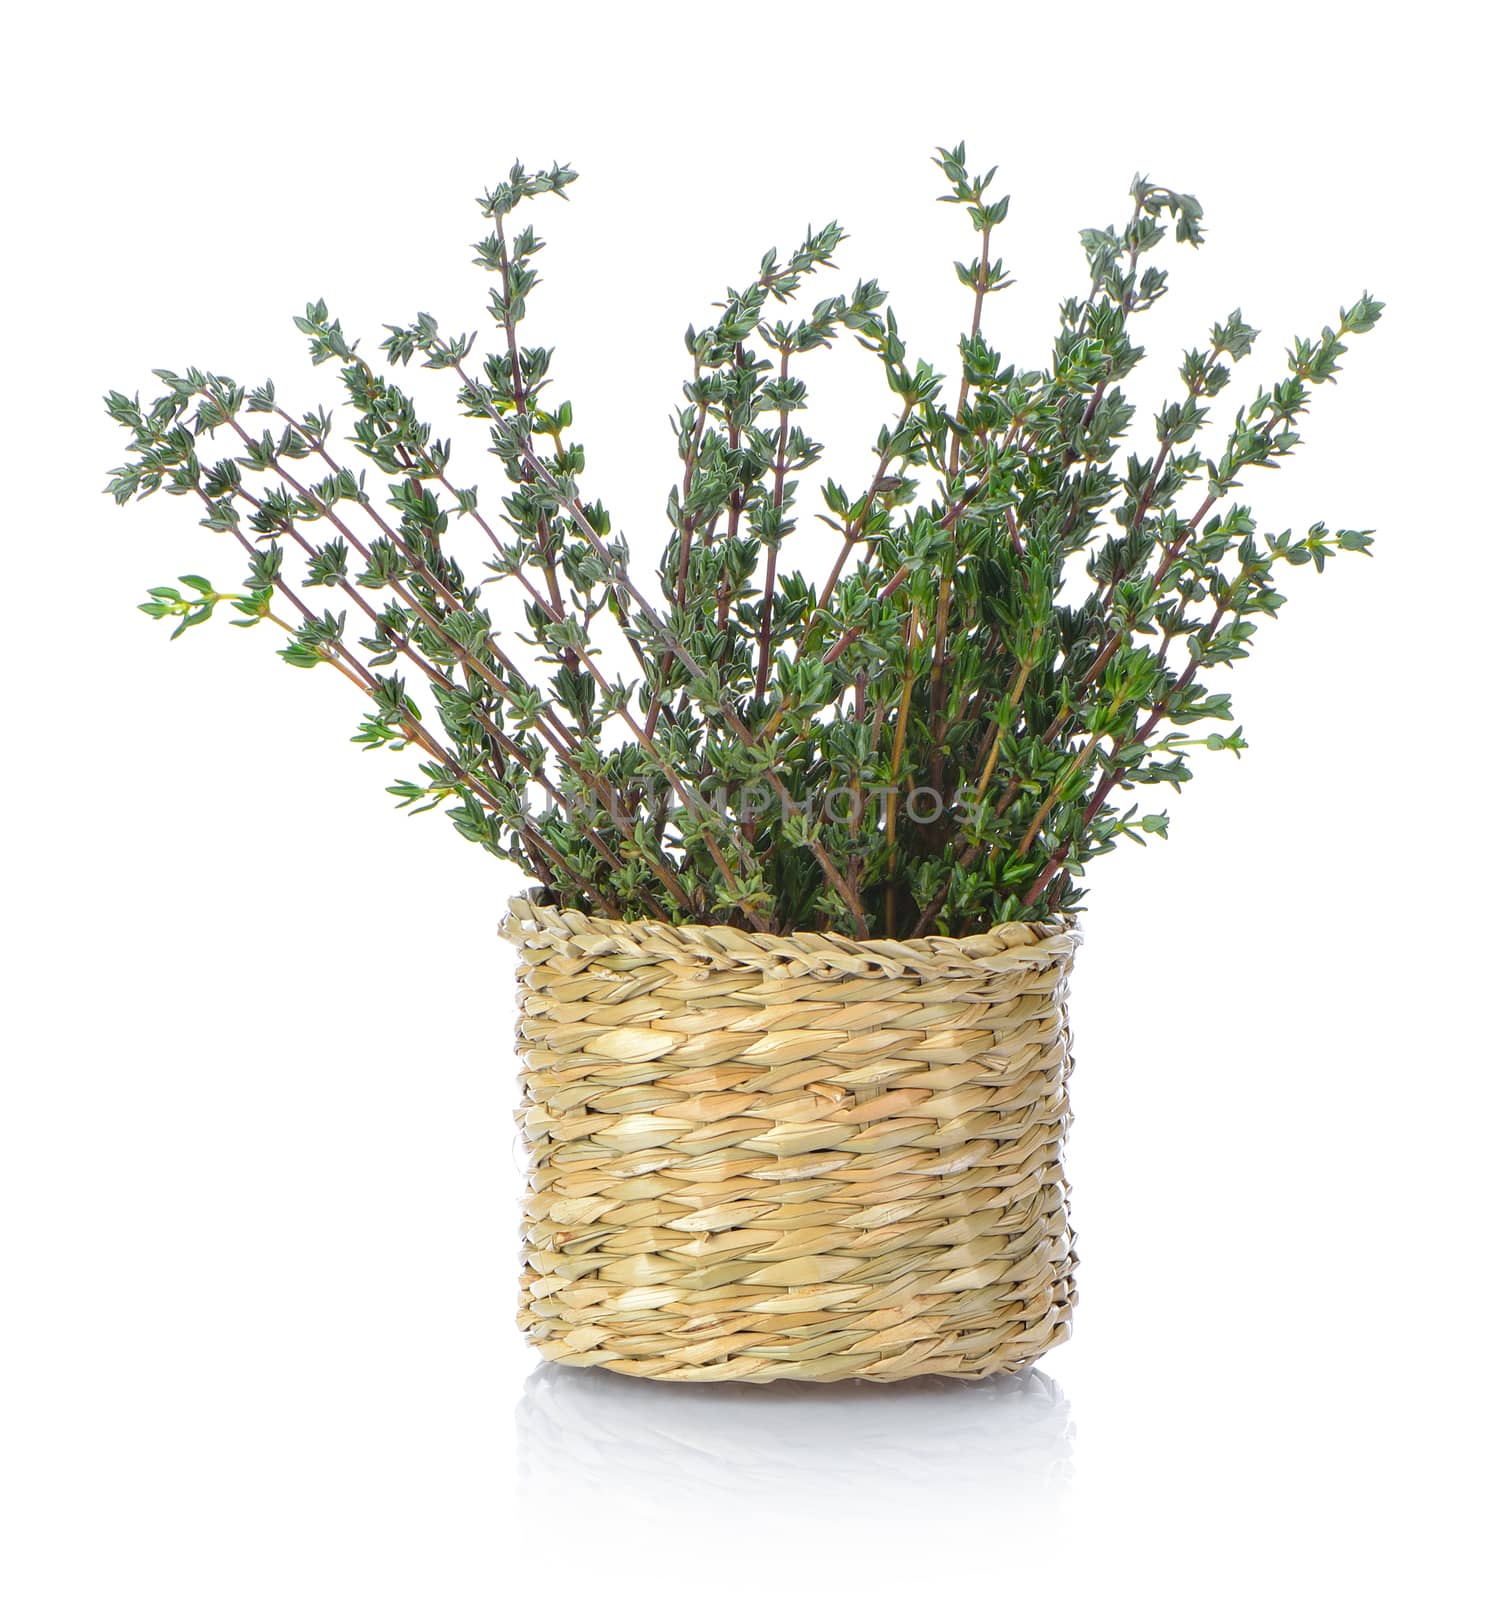 Thyme herb in basket on white background by sommai